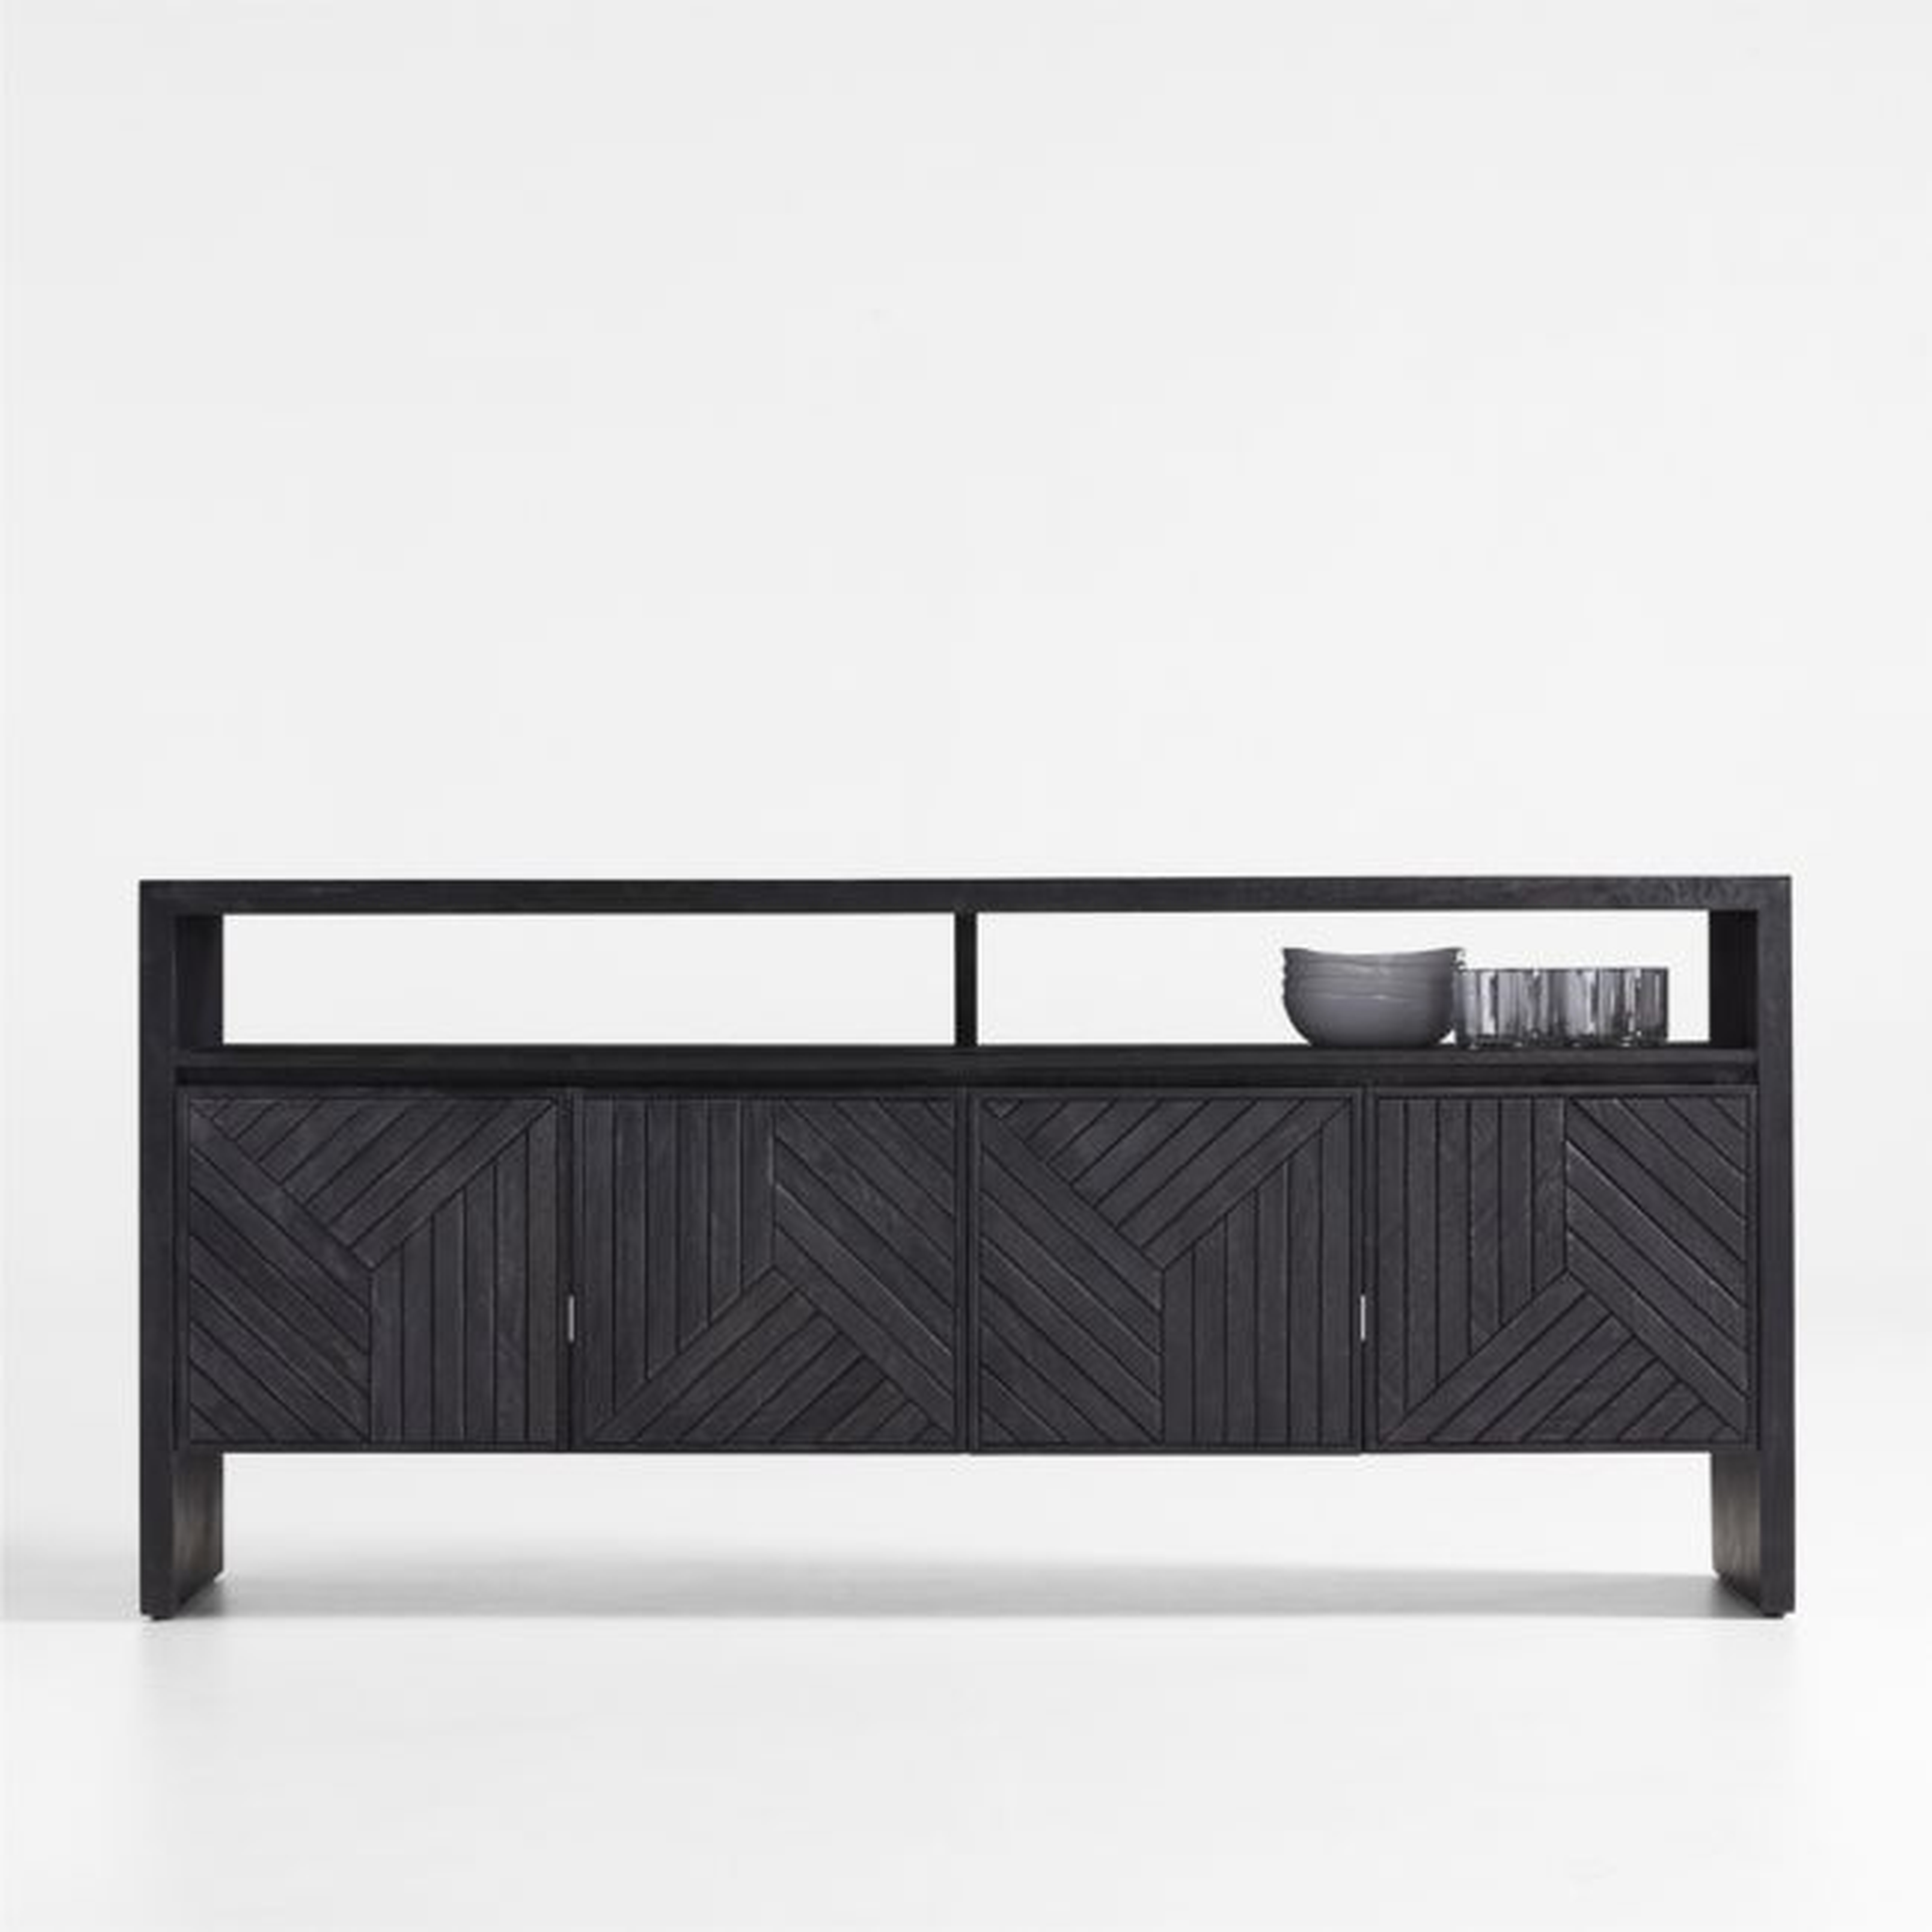 Dunewood Charcoal Sideboard with Shelf - Crate and Barrel